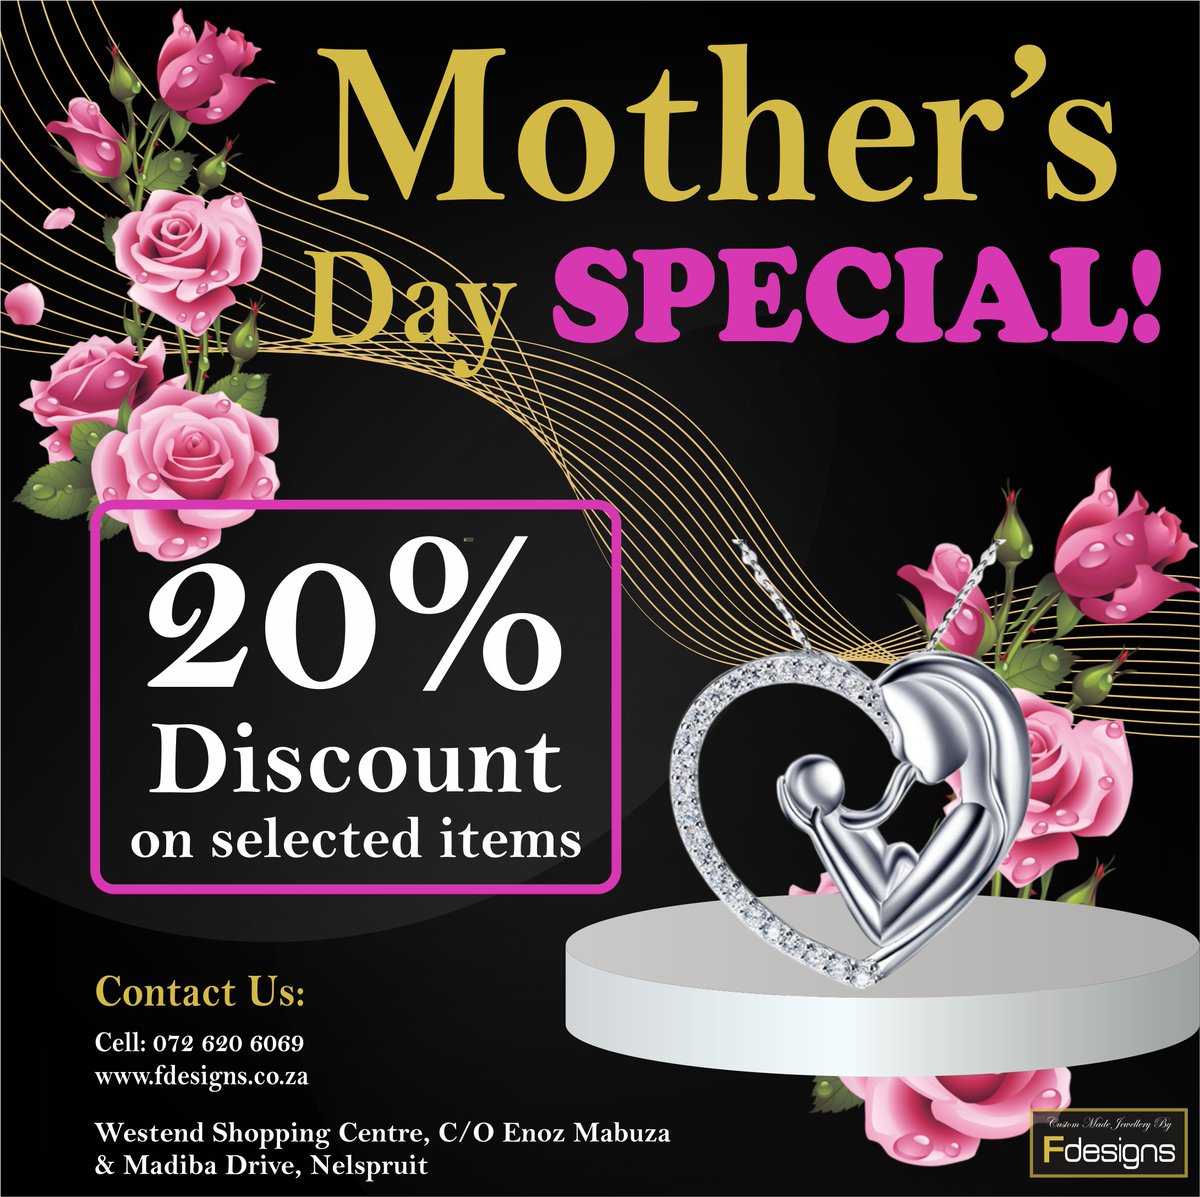 This Mother's Day, surprise the mother of your children with a heartfelt gift that she'll treasure forever. And to make it even sweeter, we're offering a special promotion of 20% off on selected items.

#MothersDay #GiftForMom #SpecialPromotion #20percentOff #JewelryForMom